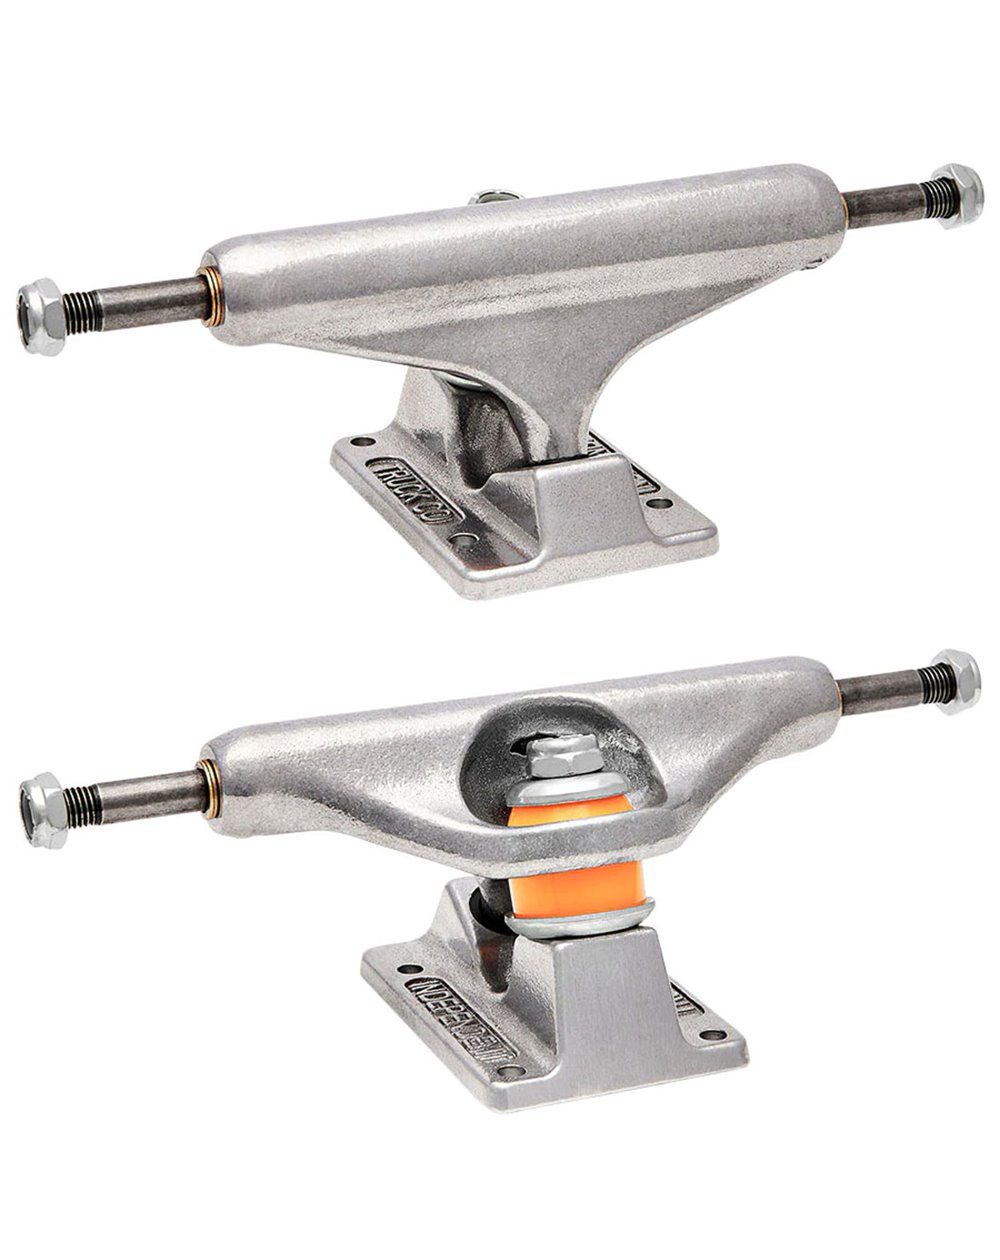 Independent Stage XI Hollow 144mm Skateboard Trucks pack of 2